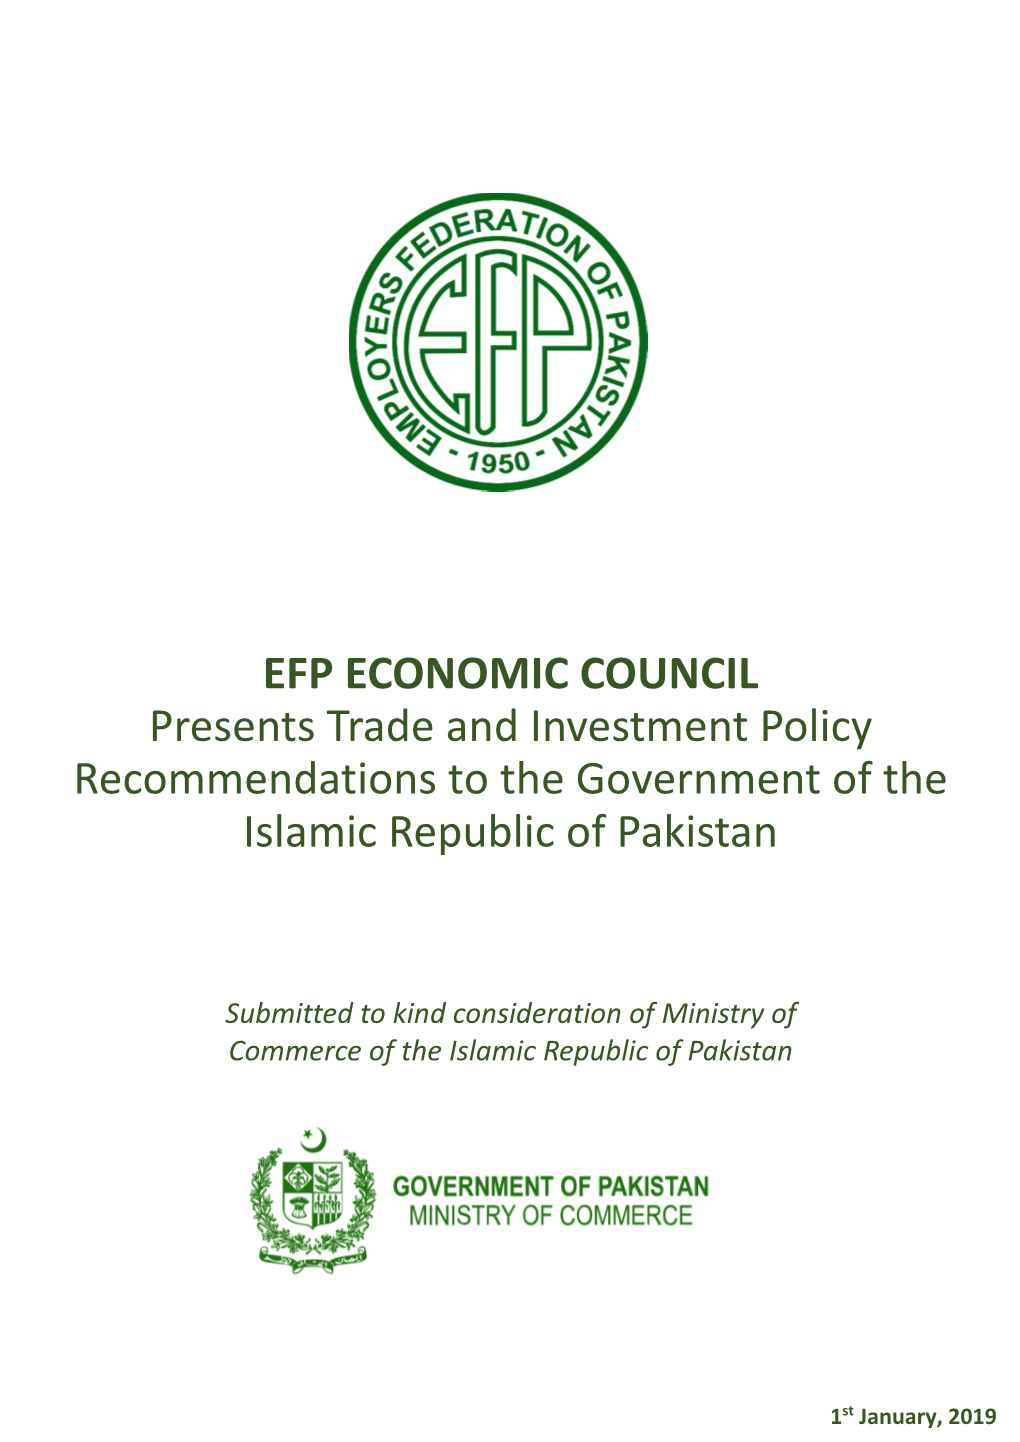 EFP Economic Council Policy Recommendations to the PTI-Led